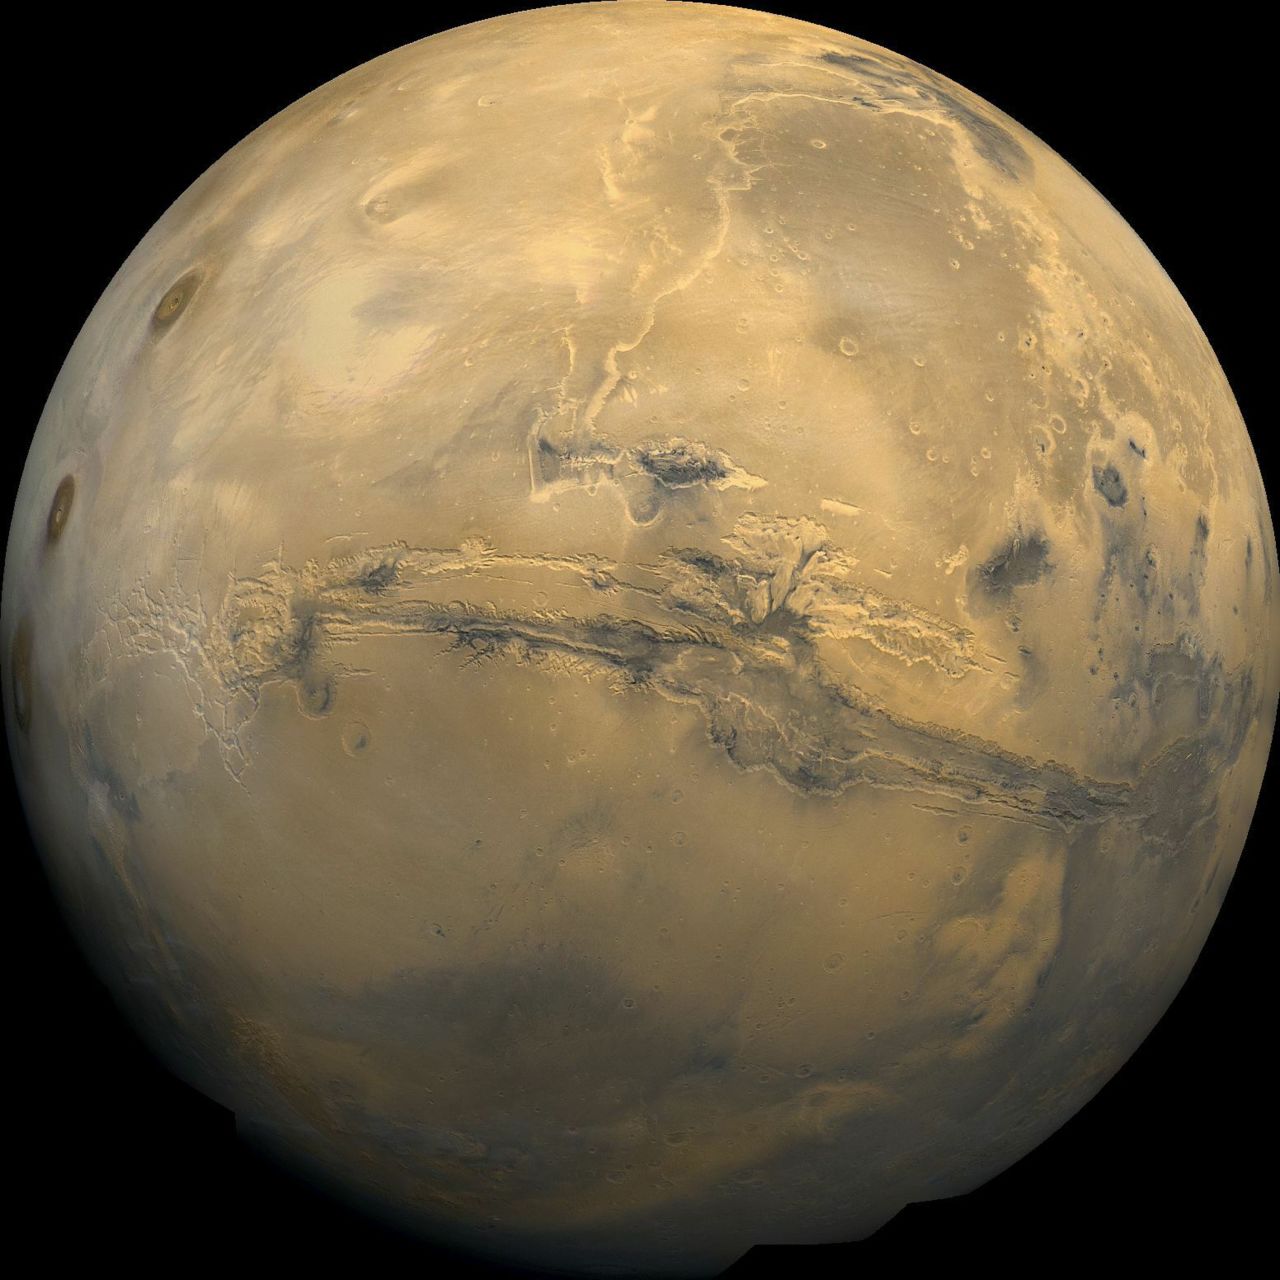 The Valles Marineris, shown in this composite image of Mars, is similar to Arizona's Grand Canyon, except it's as long as the U.S. is wide. Scientists theorize that water might have carved canyons like Valles Marineris after asteroids slammed into the Martian surface and melted underground ice. 